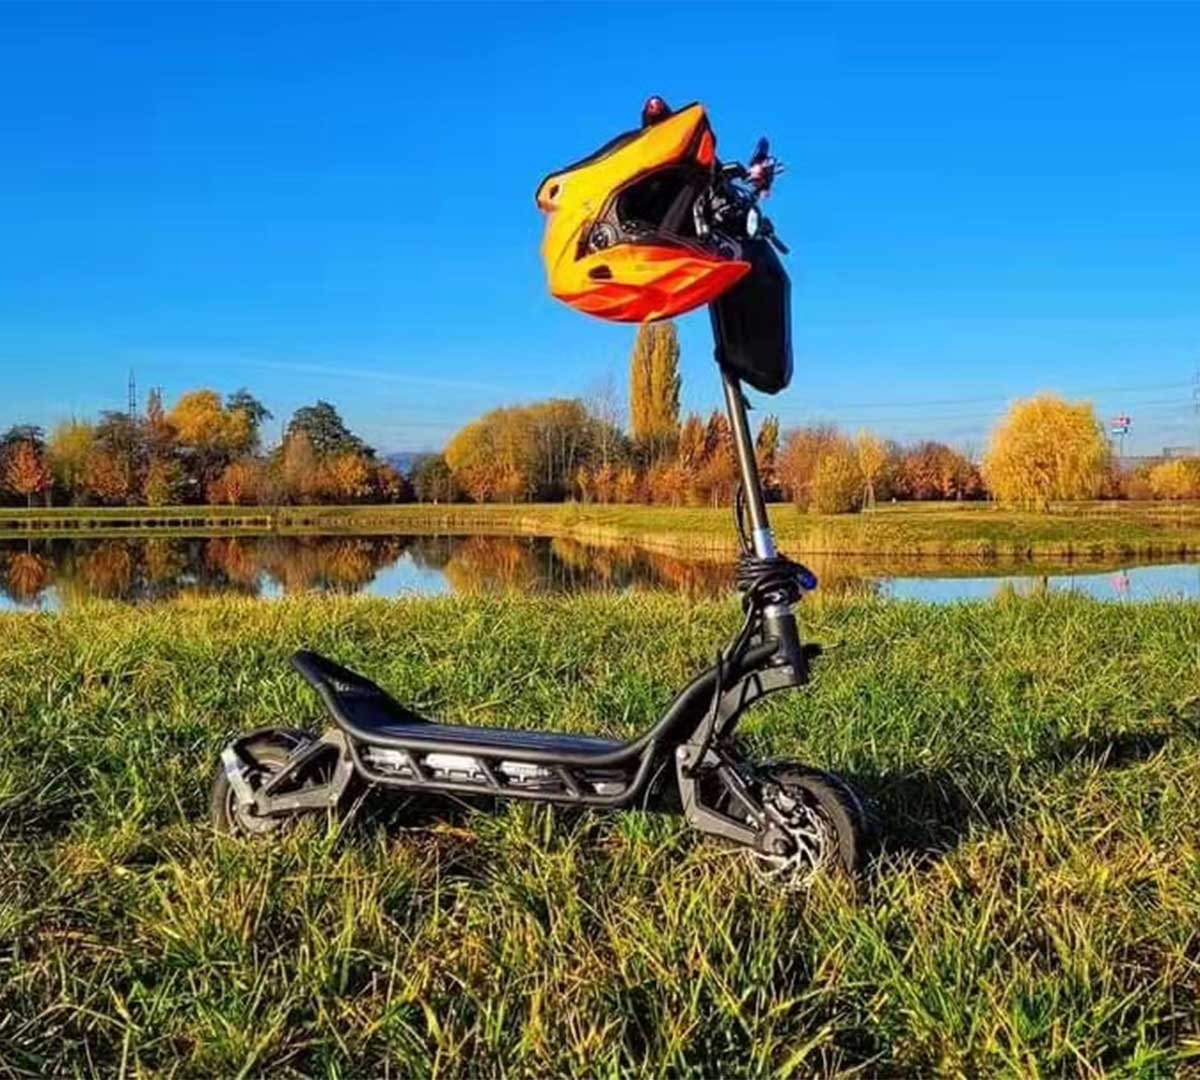 An electric scooter with a yellow helmet parked beside a lake